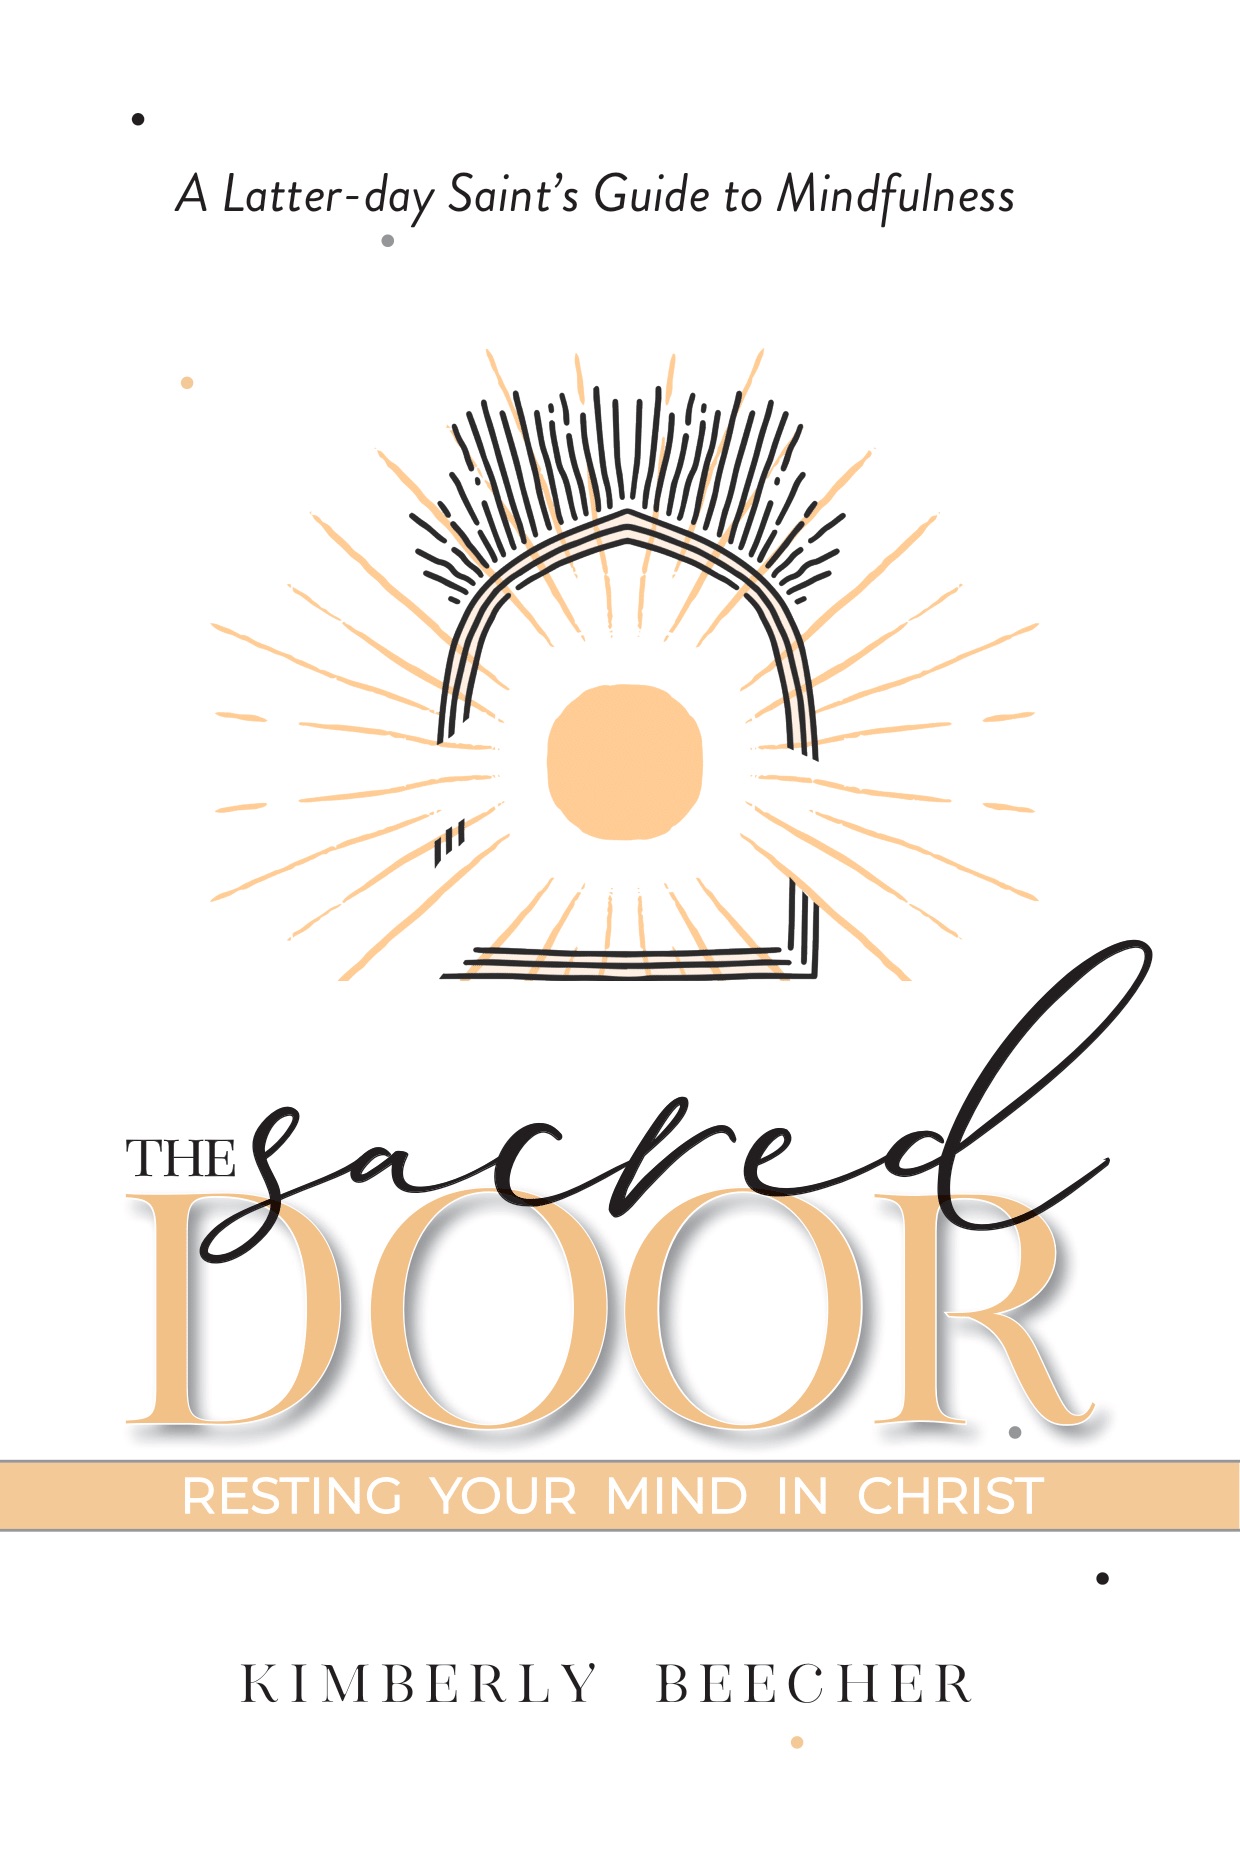 The sacred door mindfulness book cover